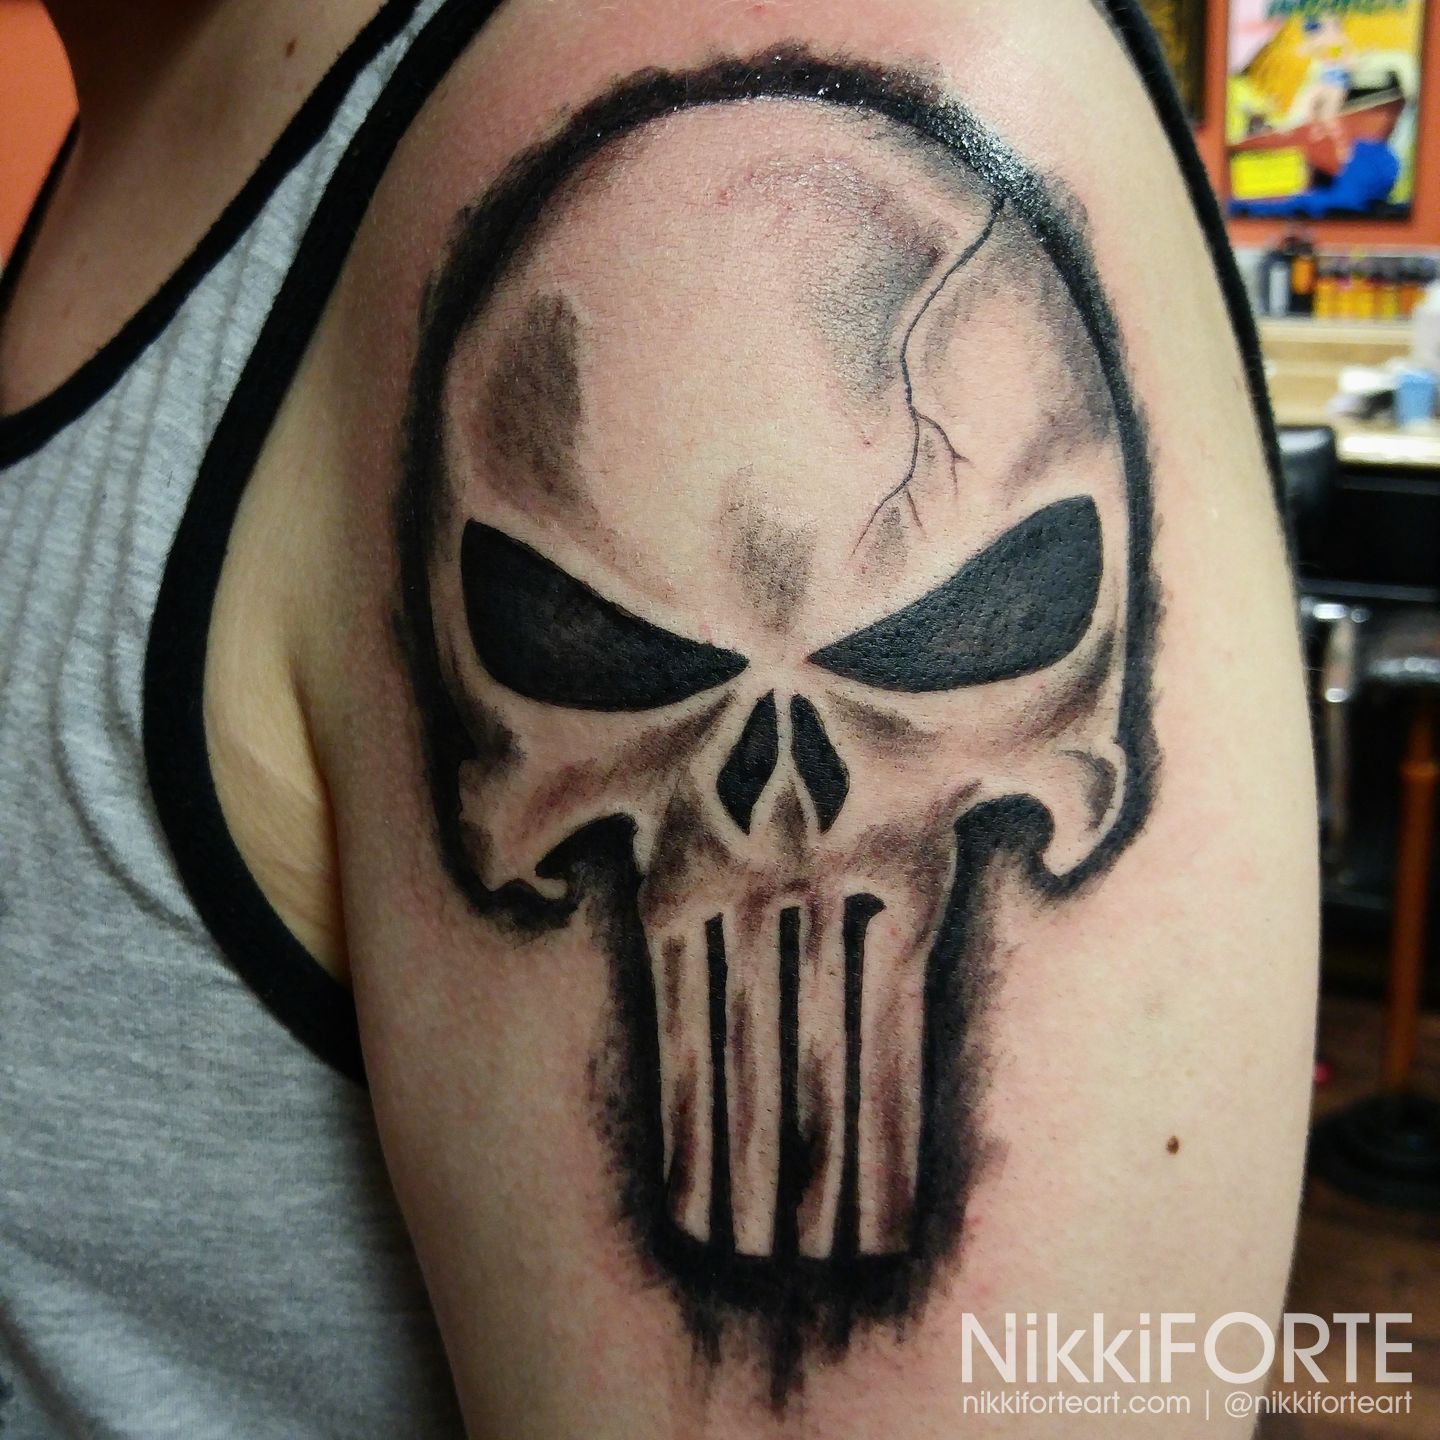 Punisher Skull tattoo done by Carlo at Black Rider Tattoo Vancouver BC  r tattoos